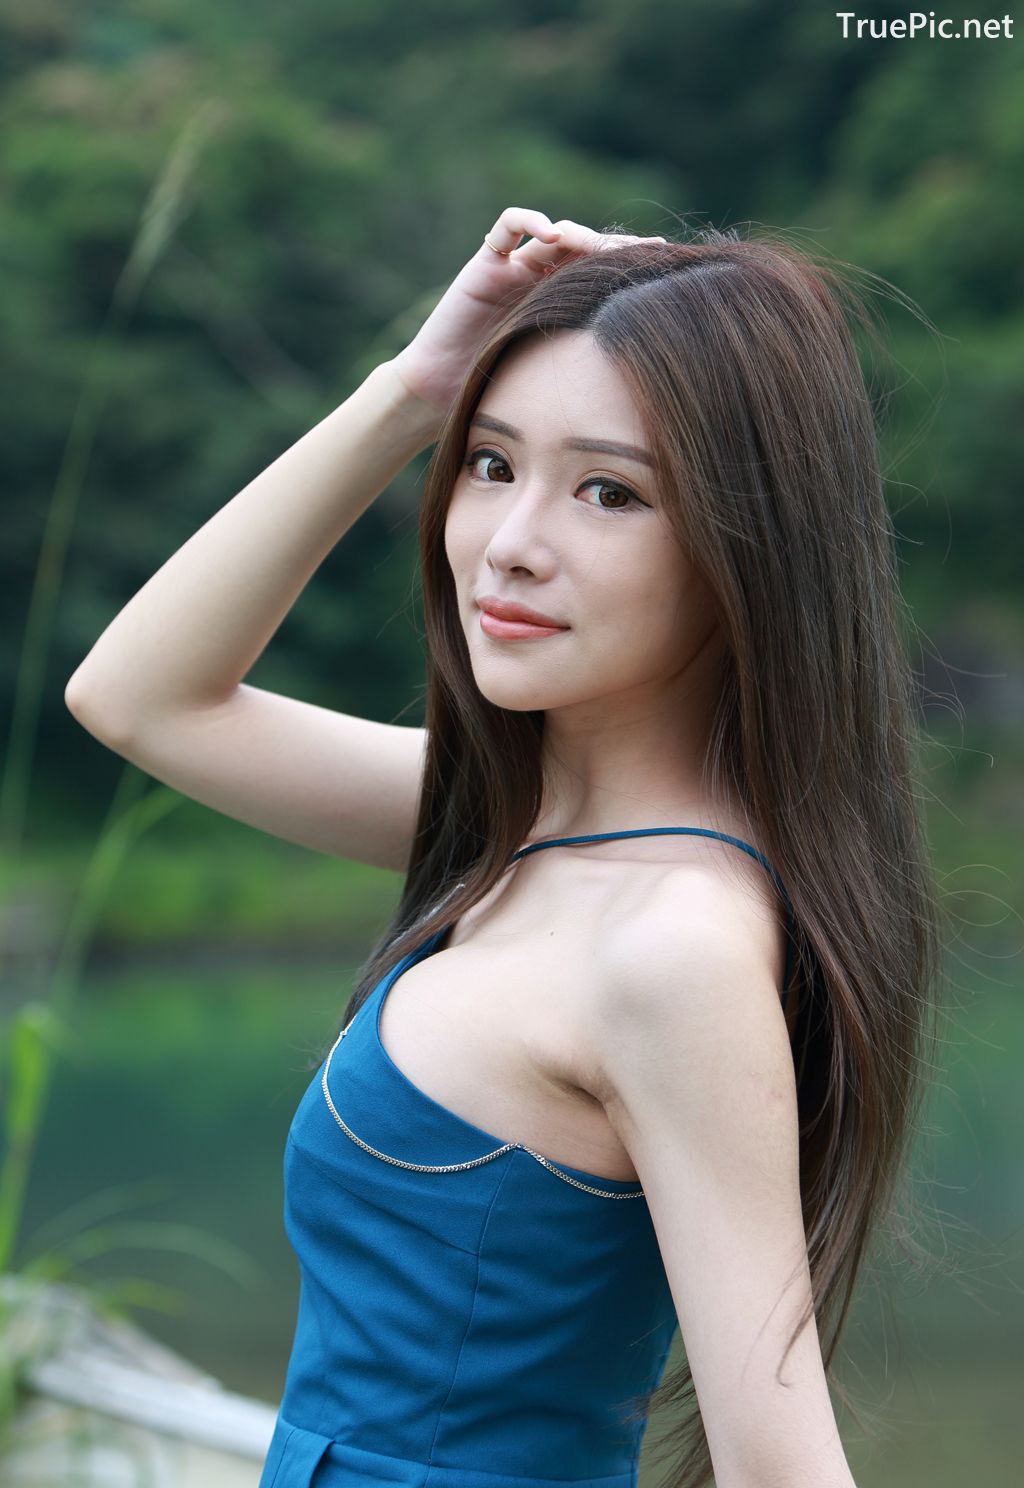 Image-Taiwanese-Pure-Girl-承容-Young-Beautiful-And-Lovely-TruePic.net- Picture-21